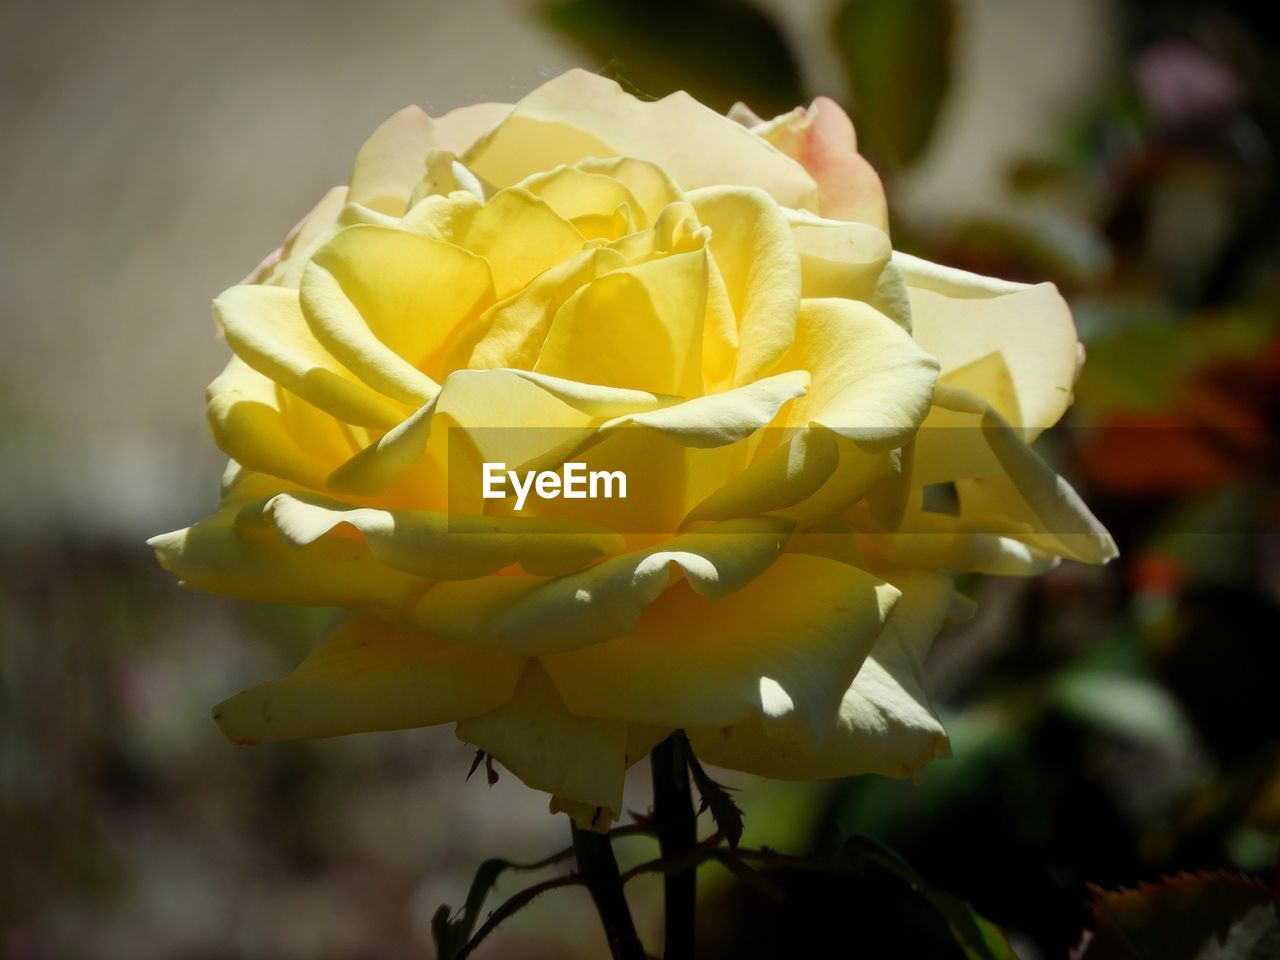 CLOSE-UP OF YELLOW ROSE IN GARDEN